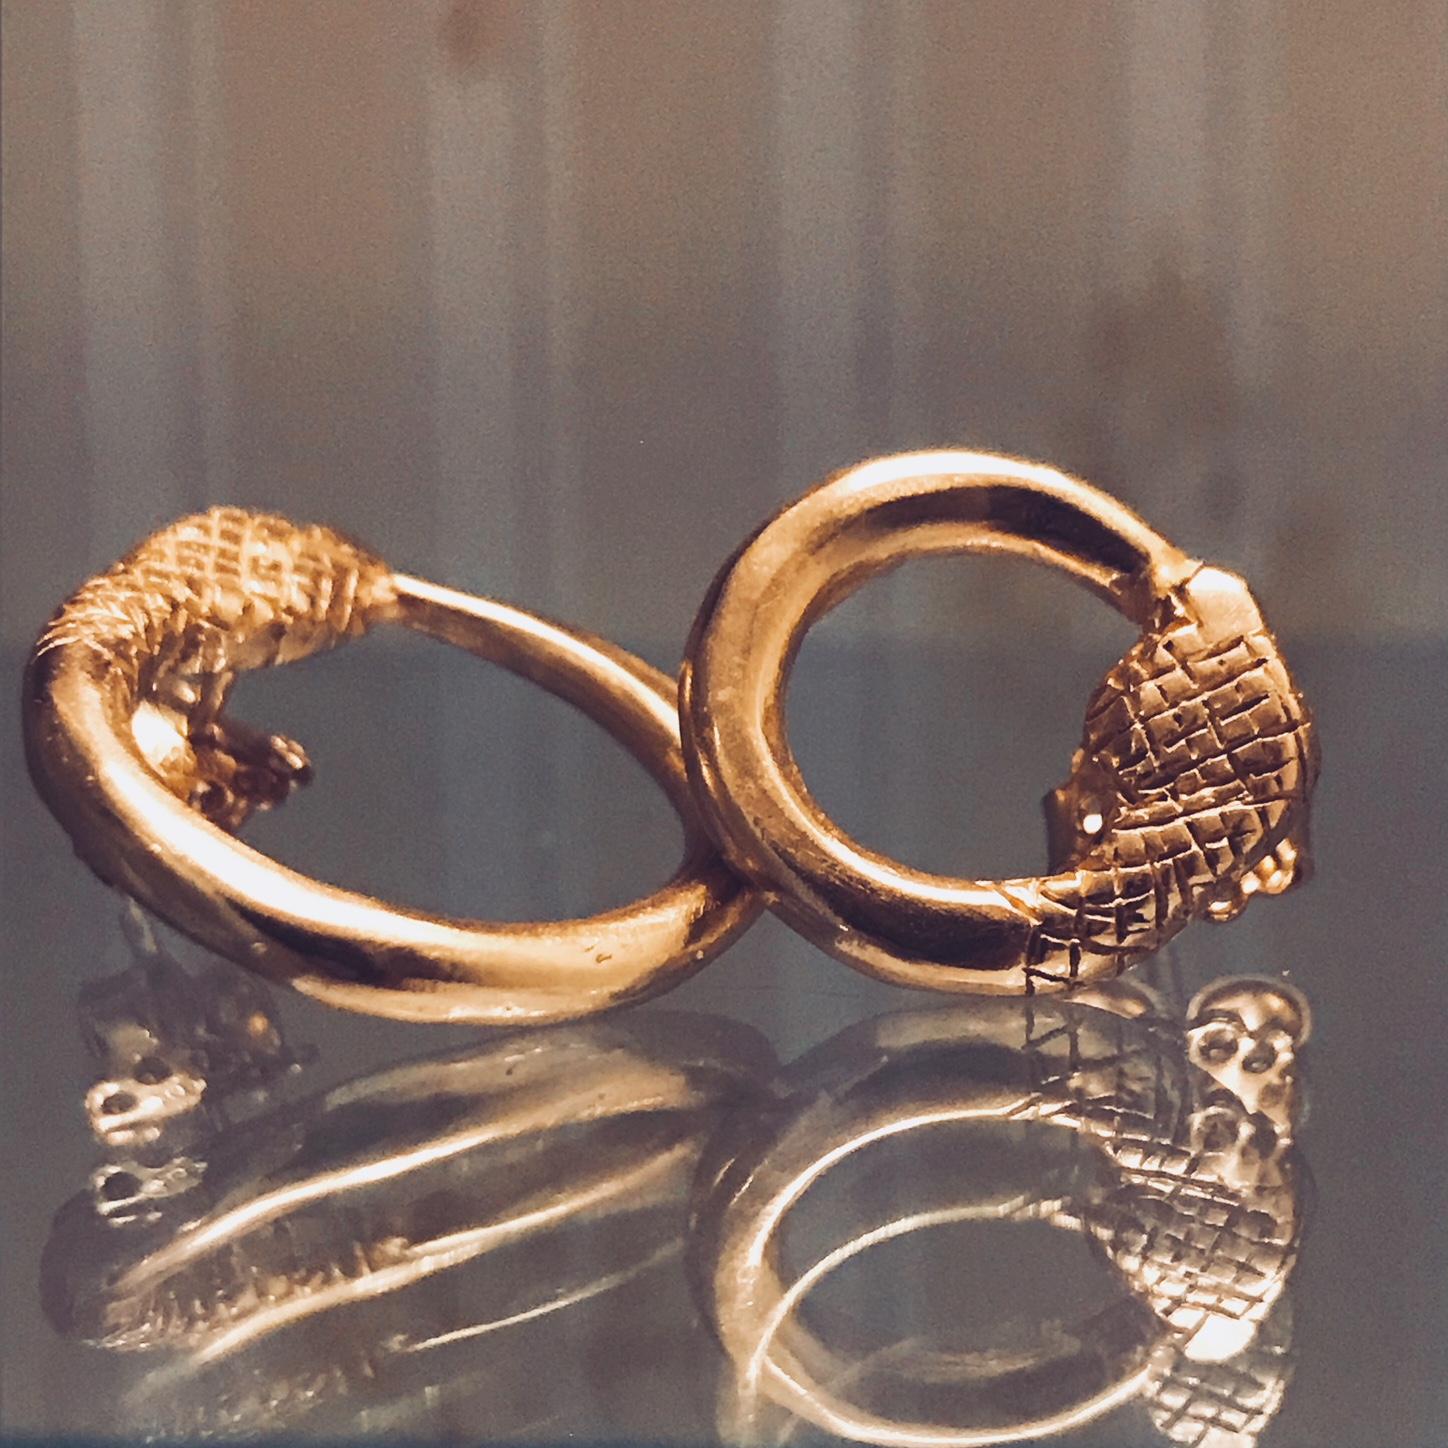 Giulia Barela Jewelry is handmade in the heart of Rome, Italy by master goldsmiths. All of our gold fine jewelry is unique. No two pieces are exactly the same because they are all handmade in gold. Giulia Barela designs her jewelry based on the